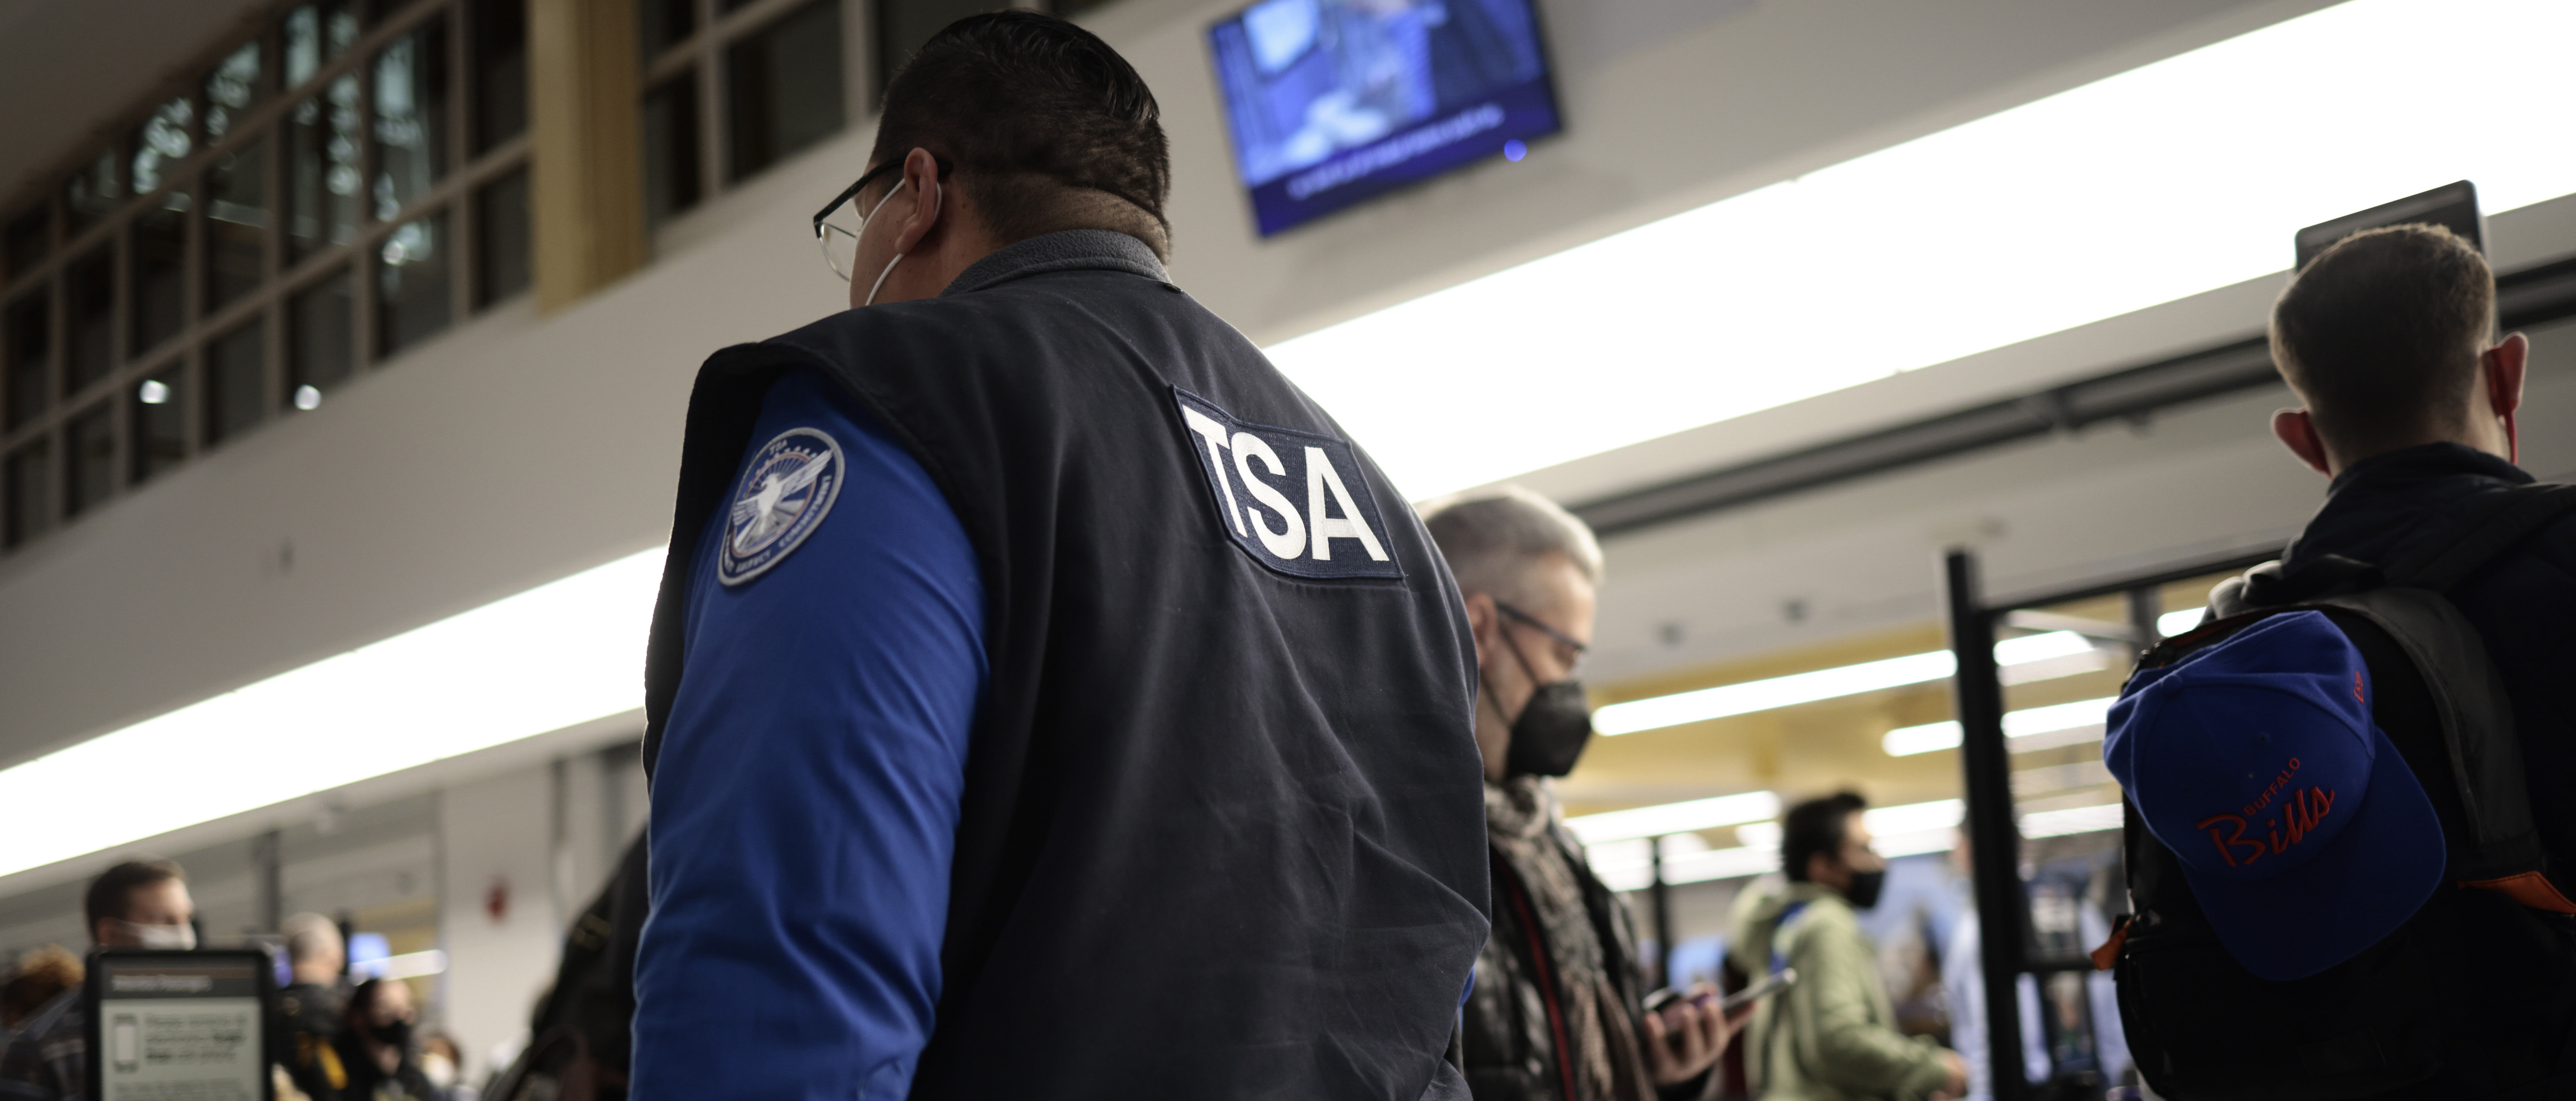 GOP Lawmakers Announce Legislation To Stop TSA From Allowing Migrants To Use Arrest Warrants As ID At Airports